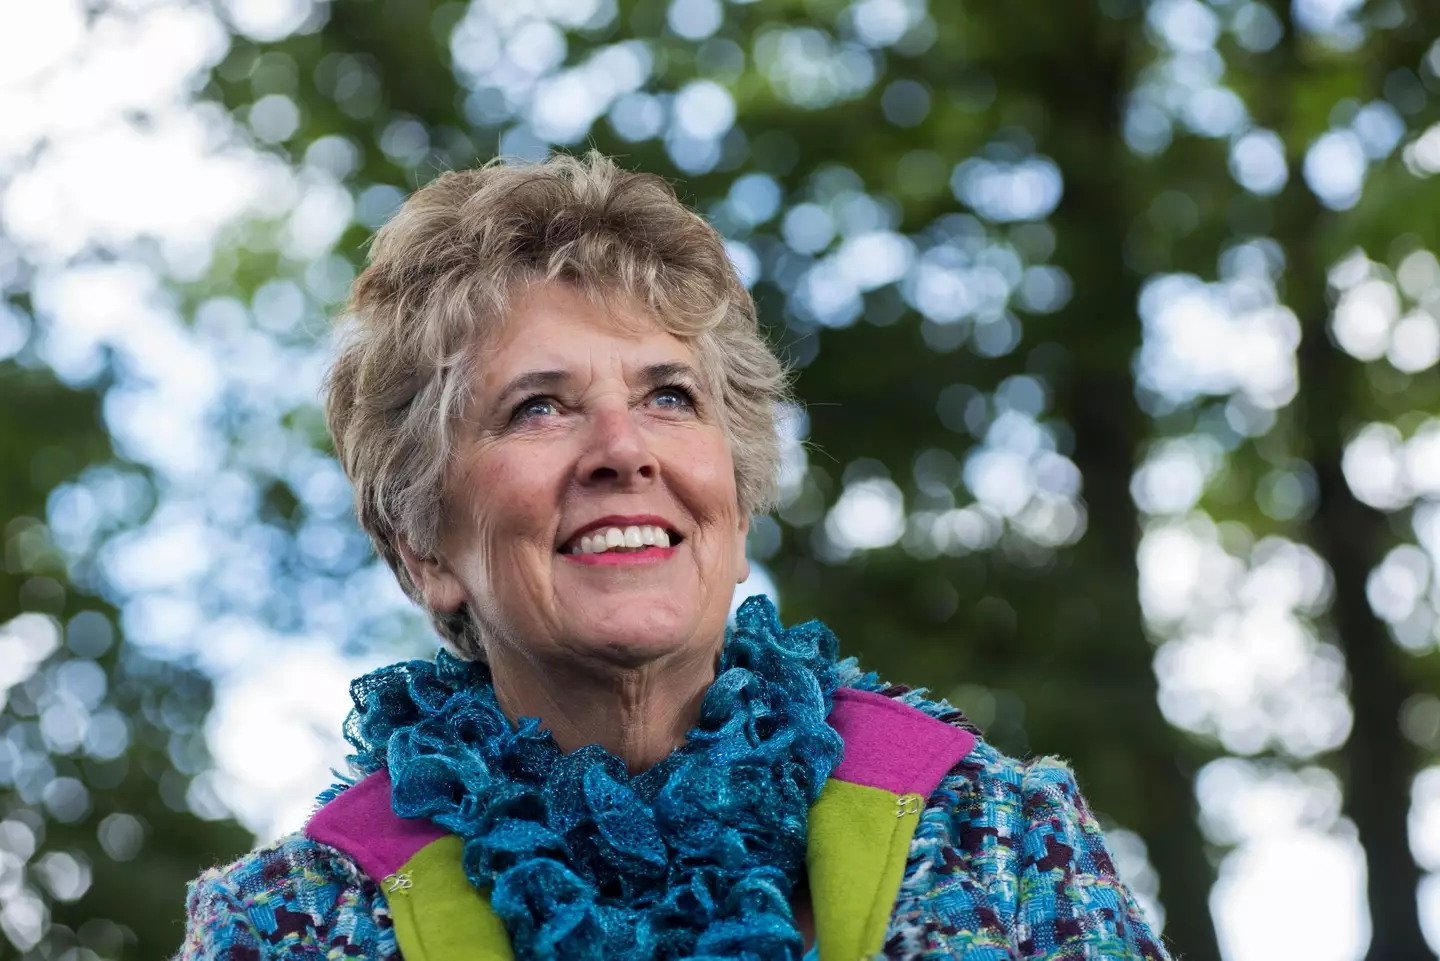 Dame Prue Leith has a message for the government: it’s time to change the laws around assisted dying.